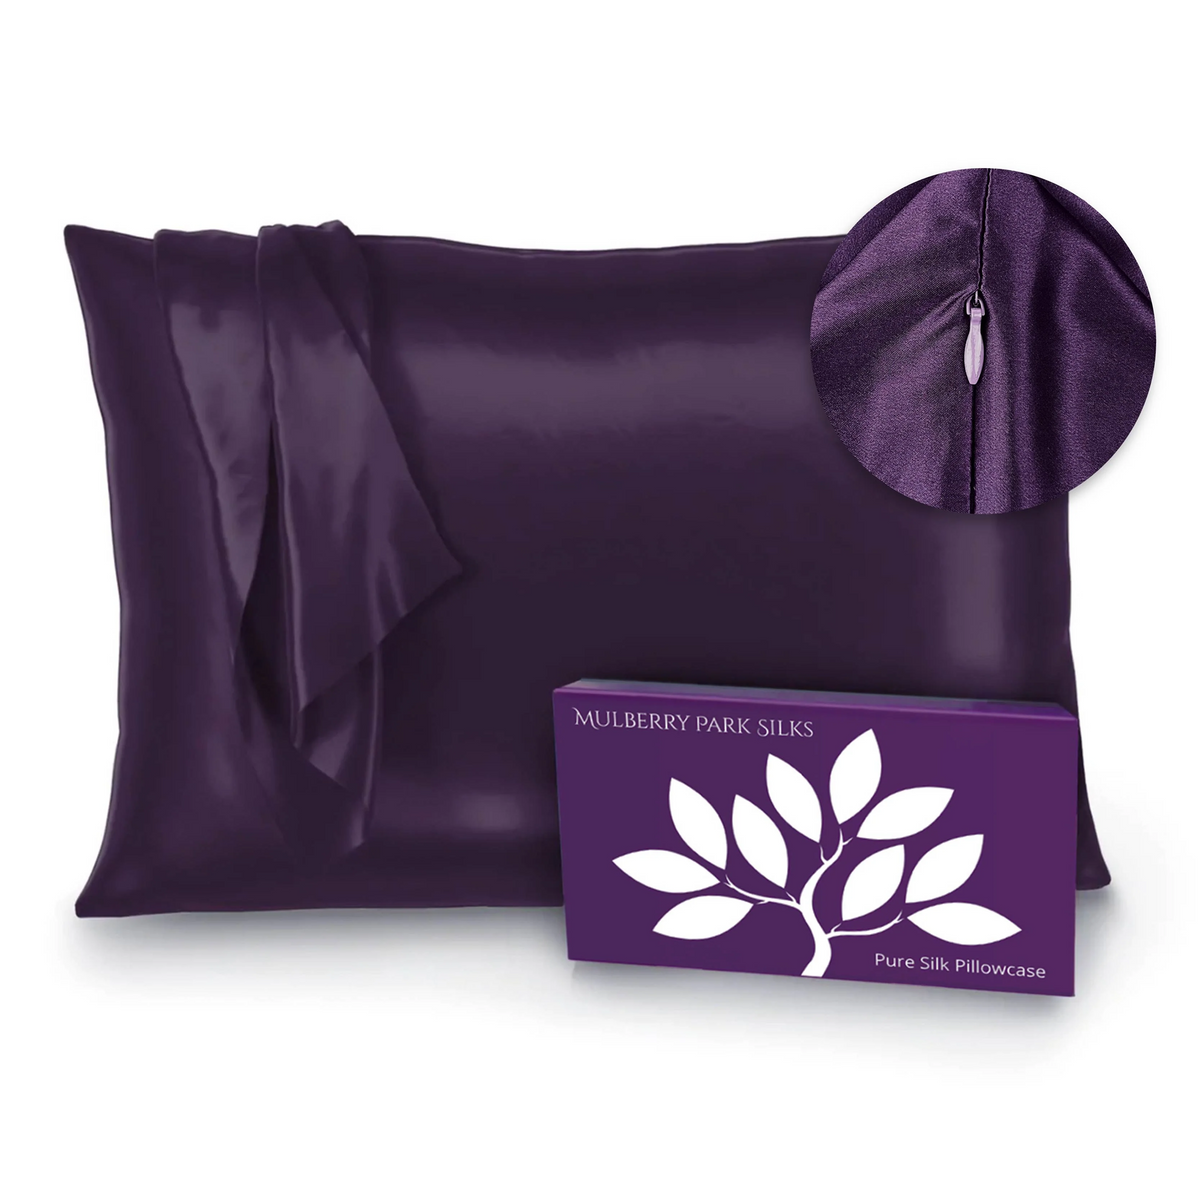 Plum Silo Image of Mulberry Park Silks Deluxe 22 Momme Pure Silk Pillowcase with Zipper Detail and Box